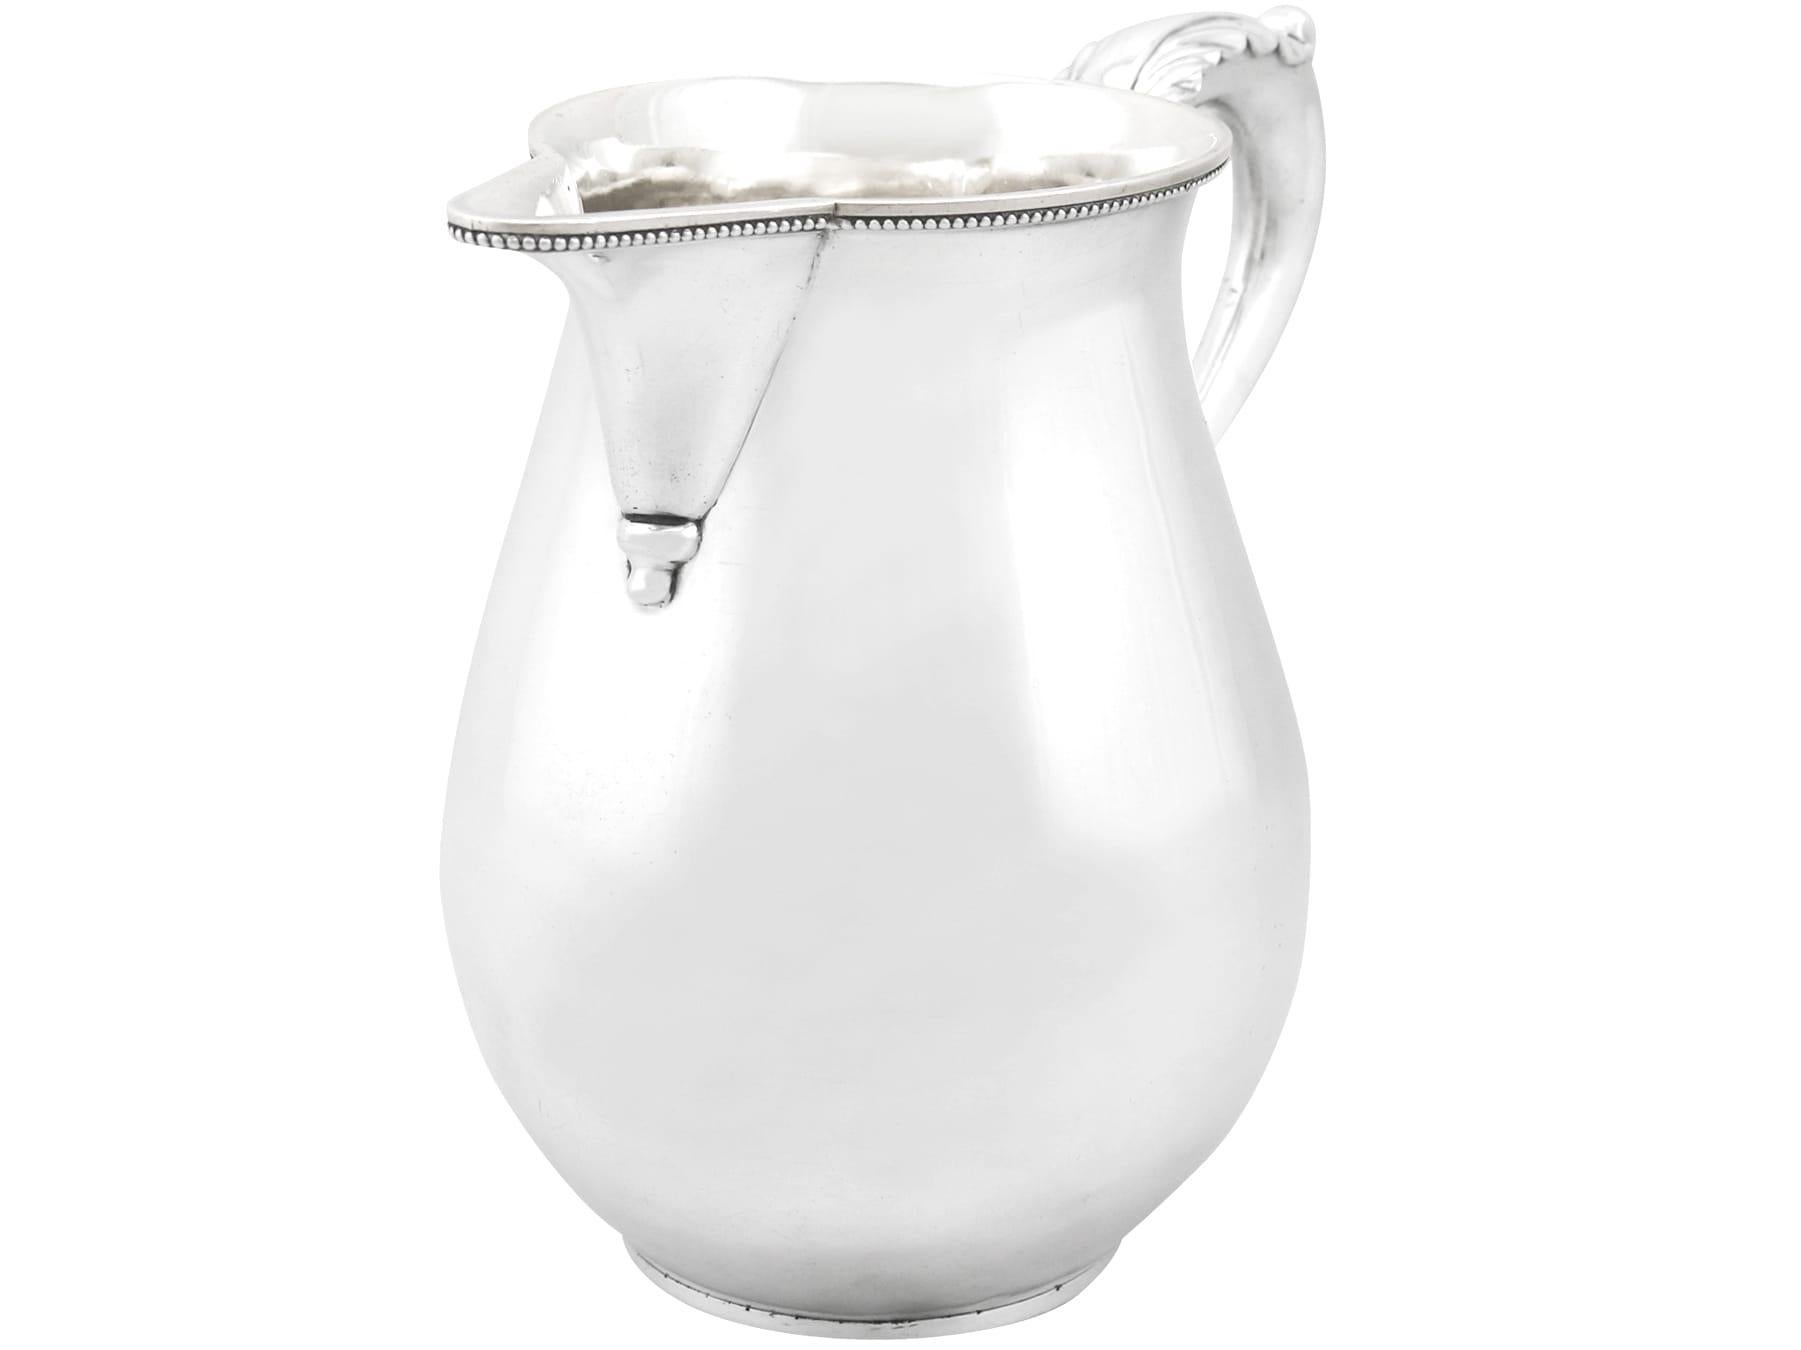 English Antique Thomas Chawner 1780s Sterling Silver Beer or Water Jug For Sale